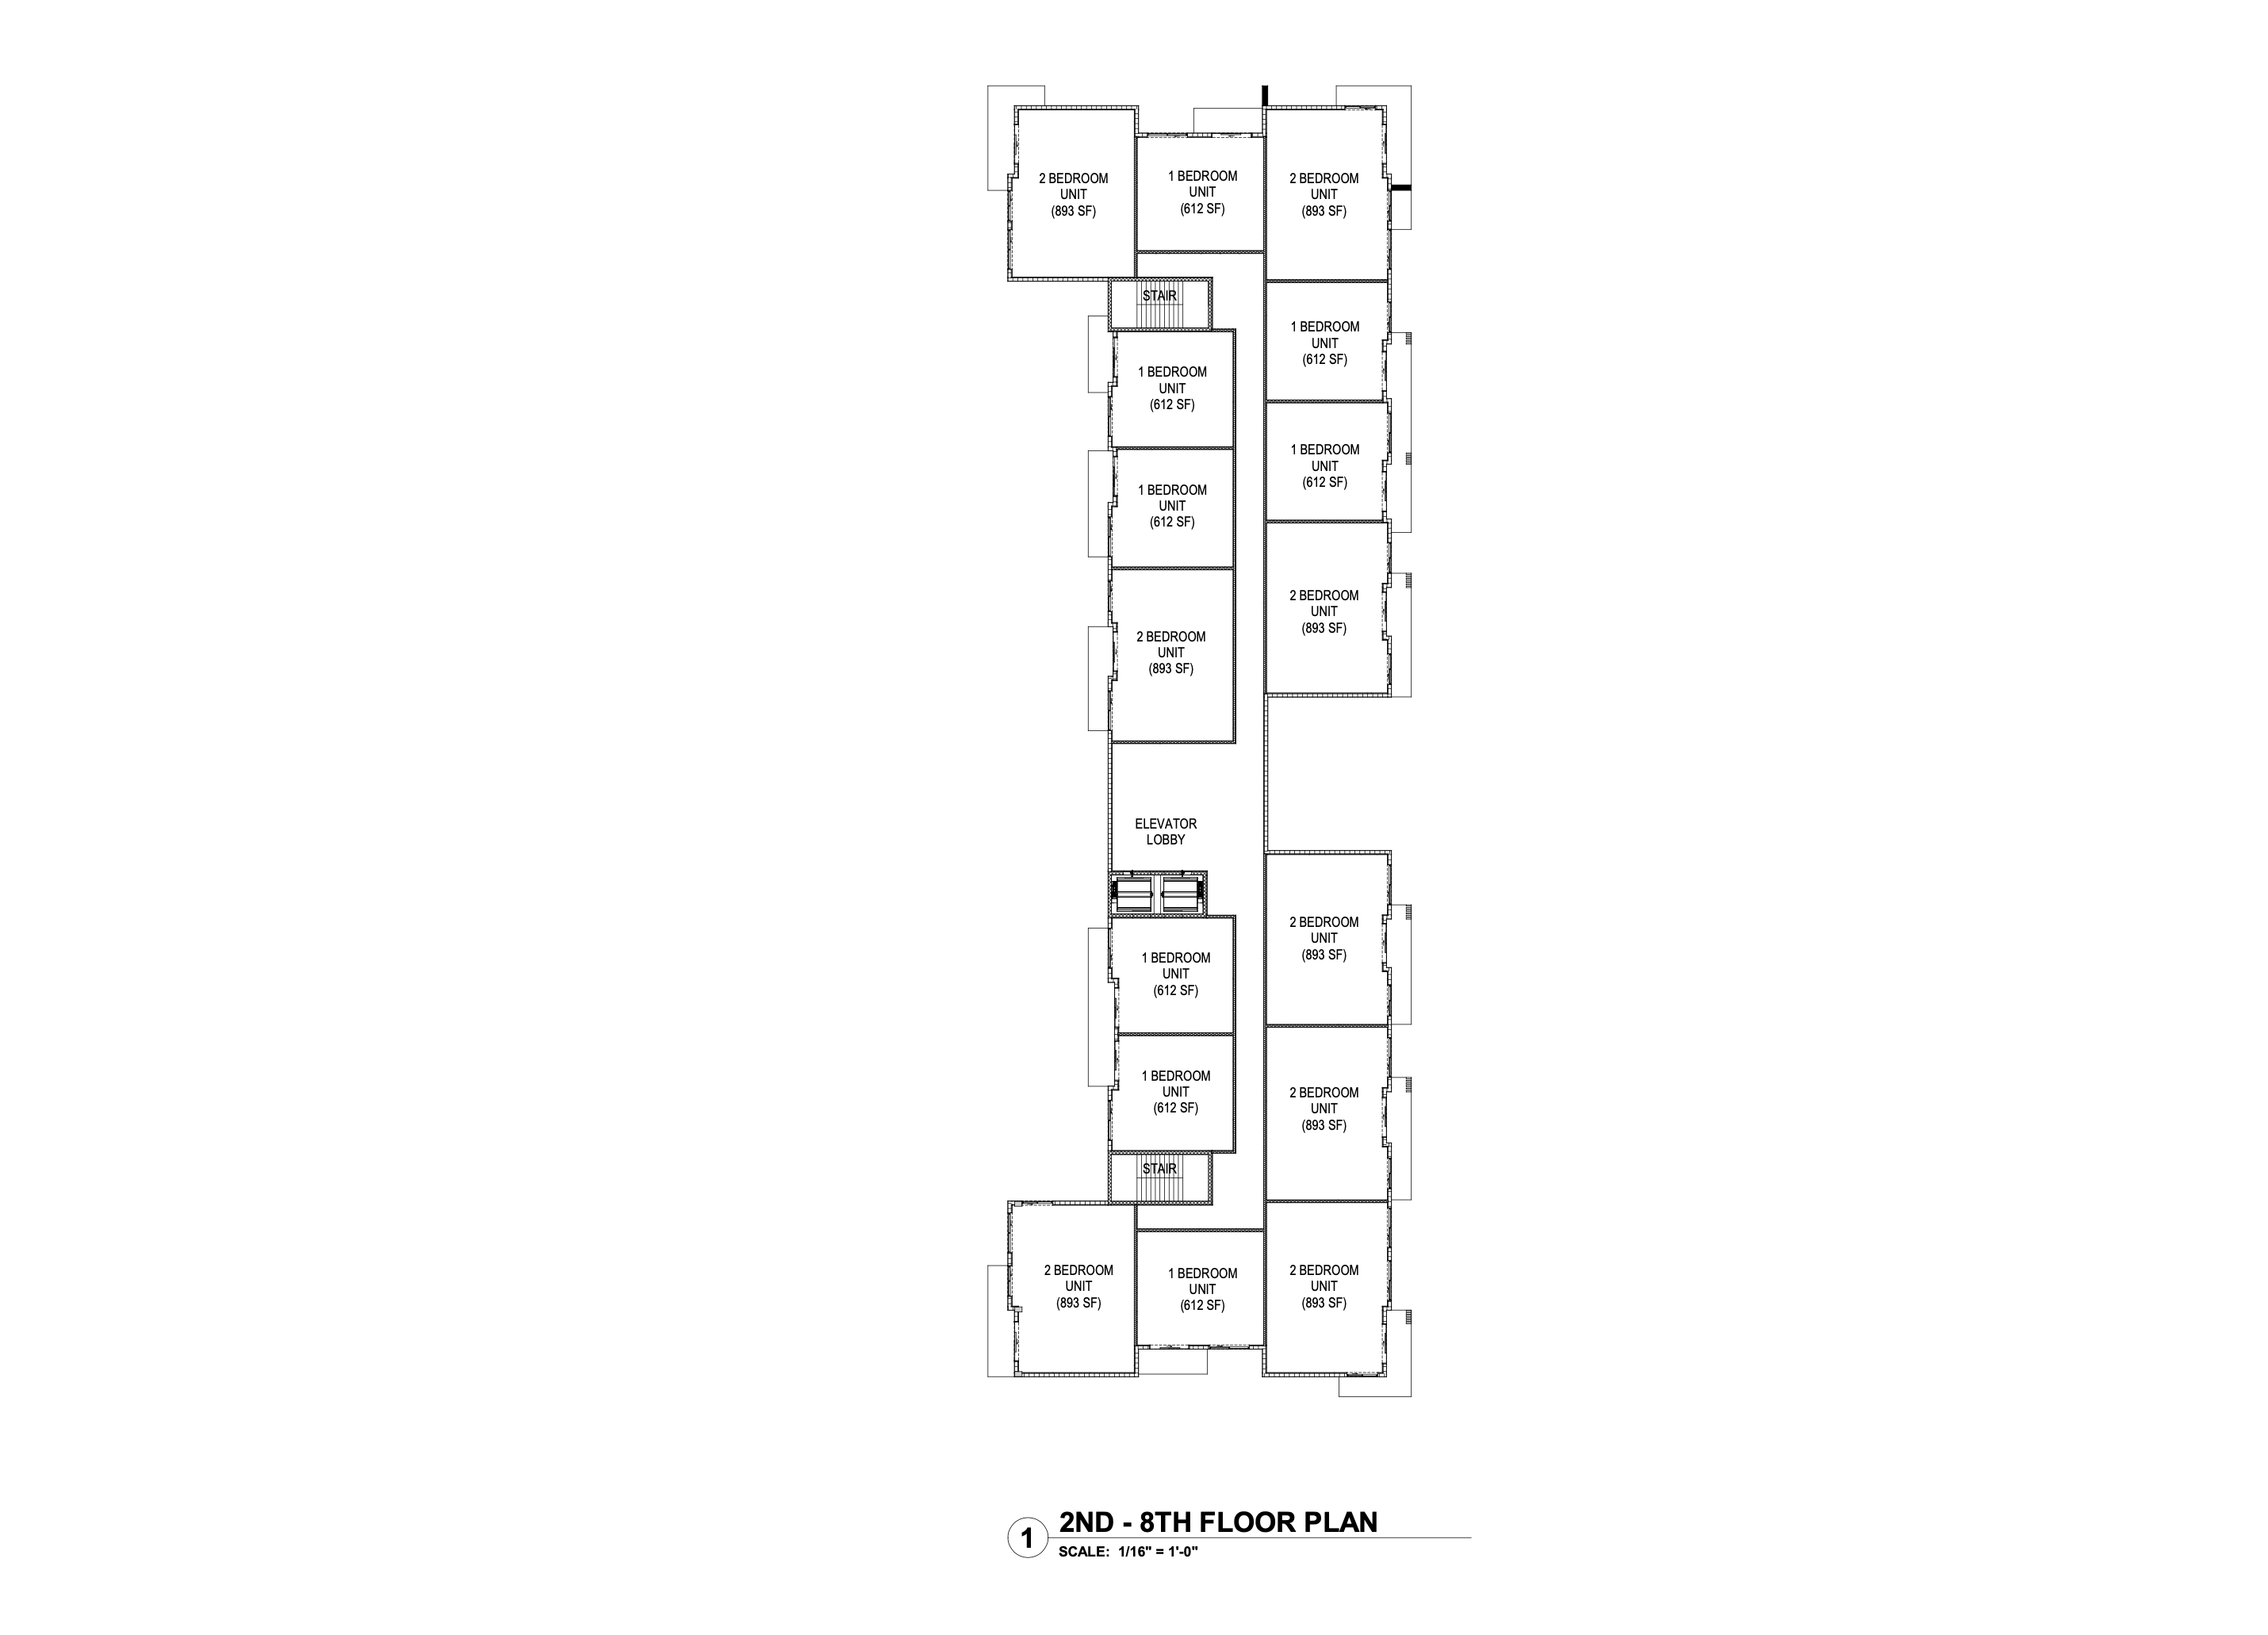 Floor Plan of Levels 2 - 8. Designed by Corwil Architects.